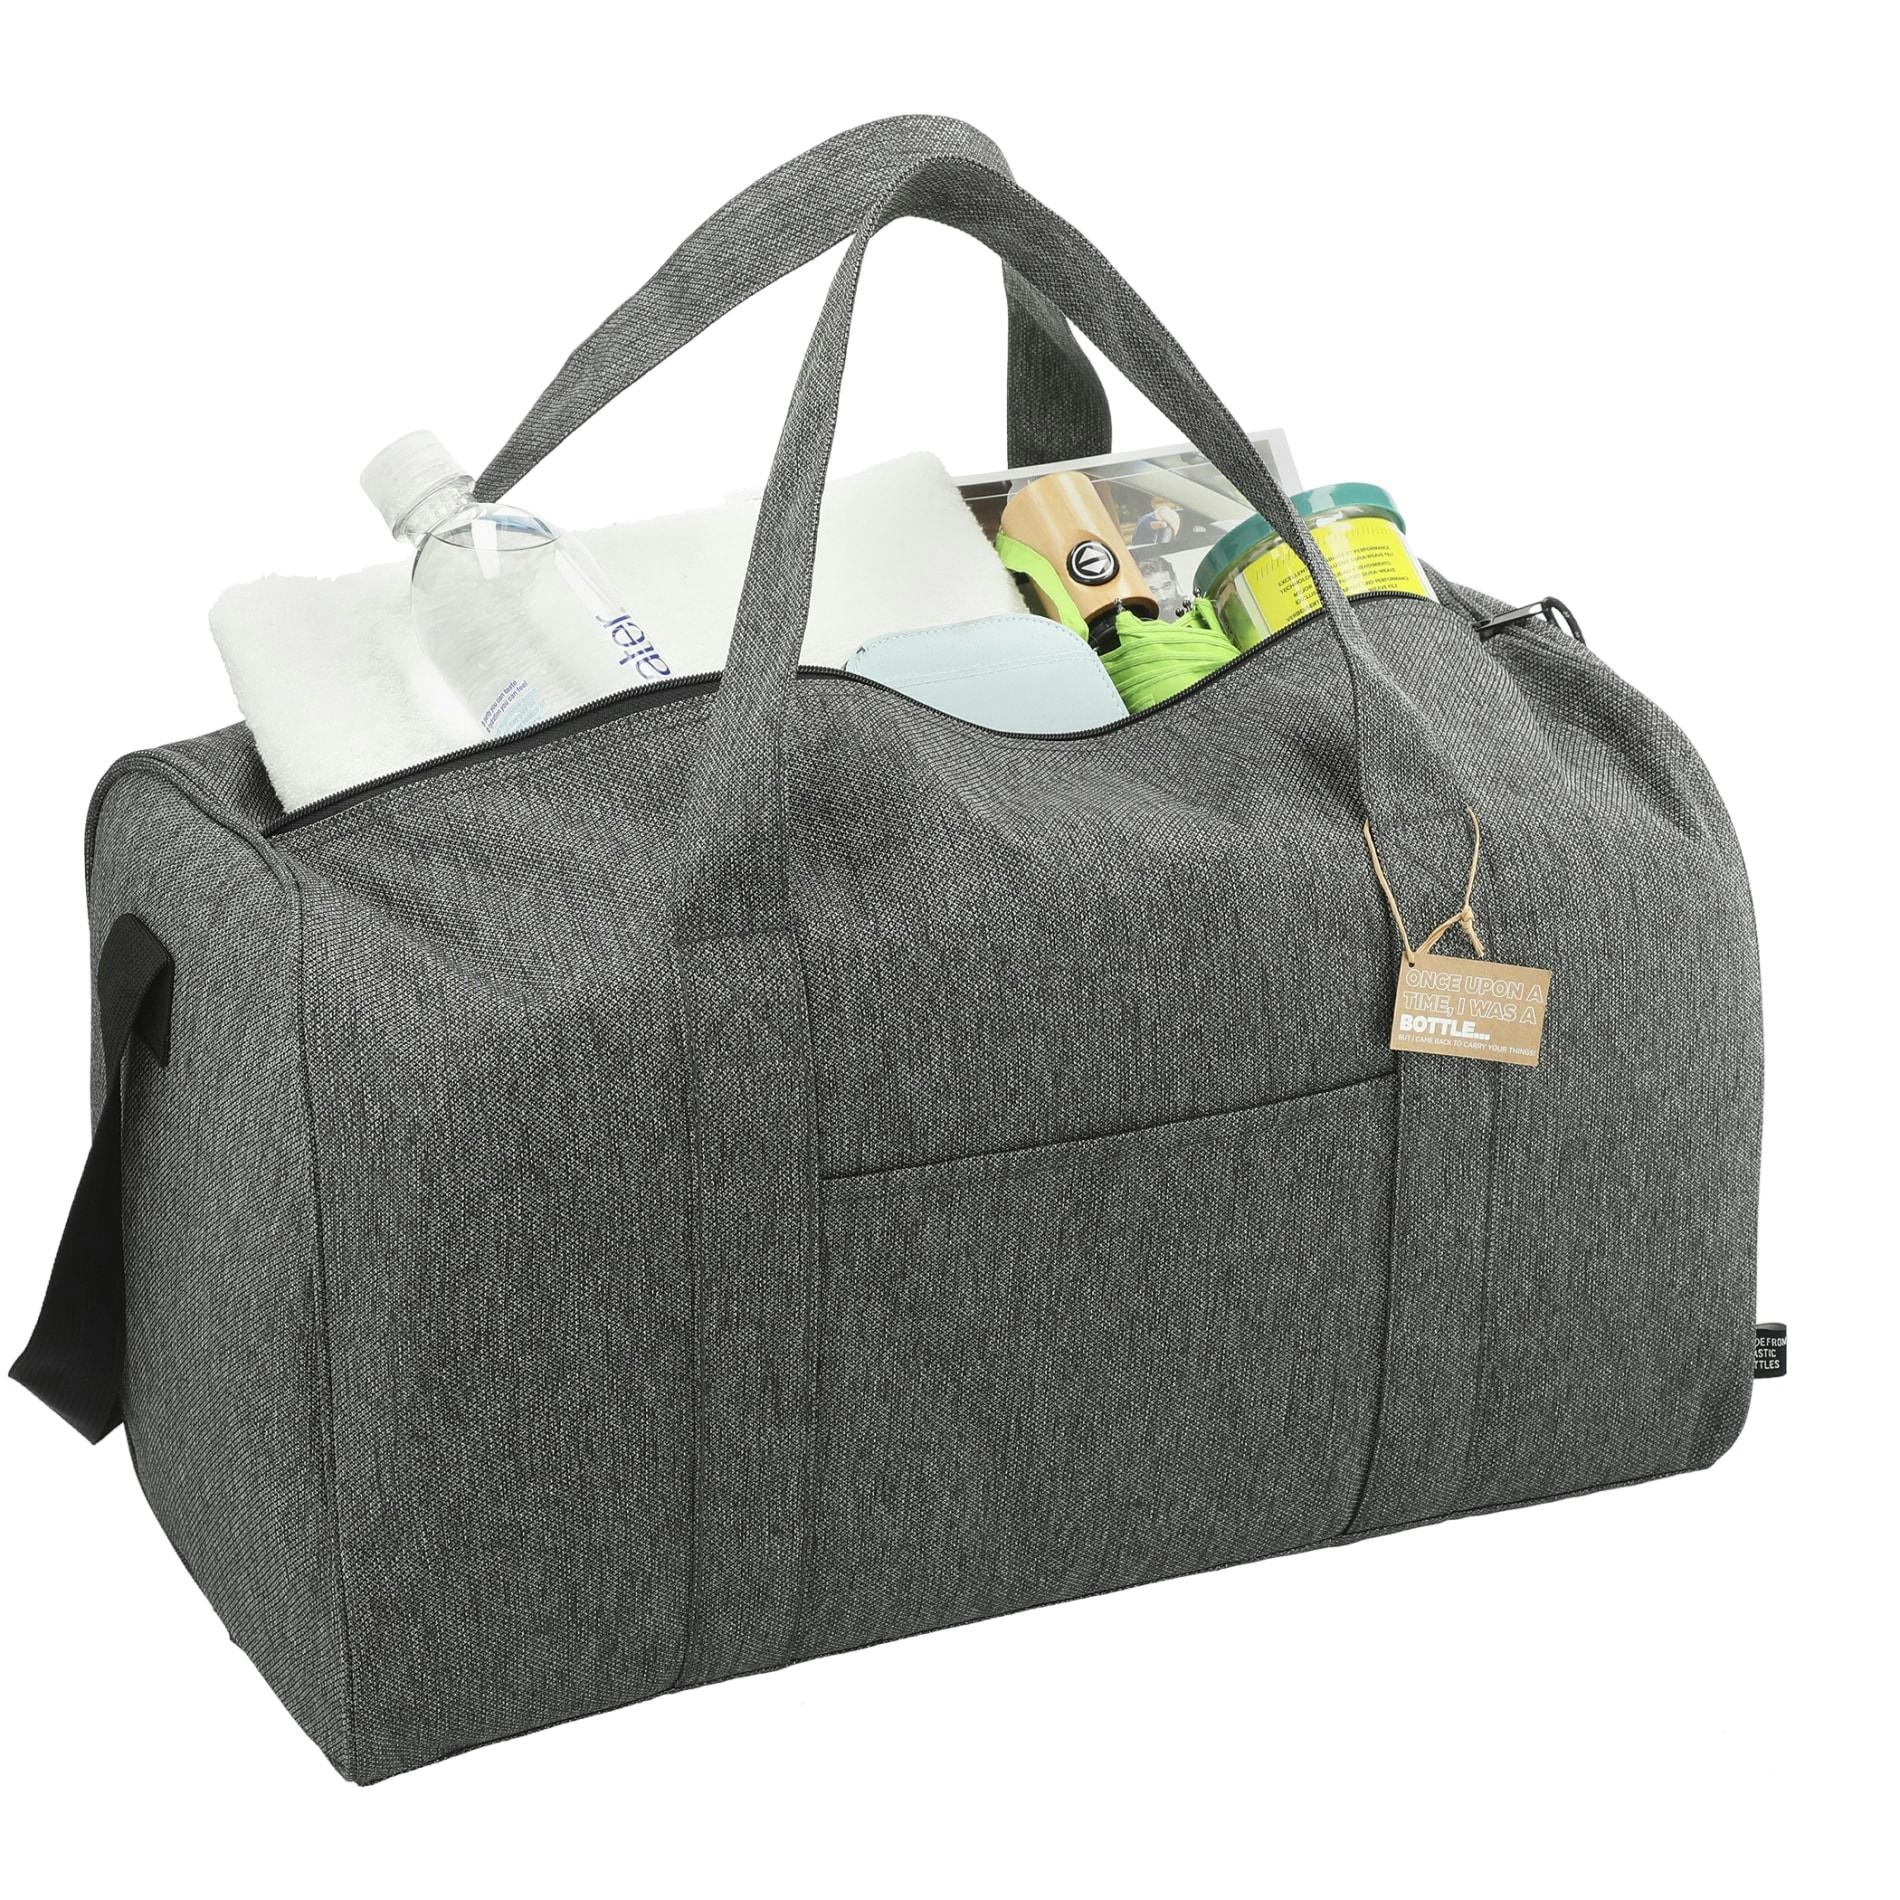 Vila Recycled Executive Duffel - additional Image 4